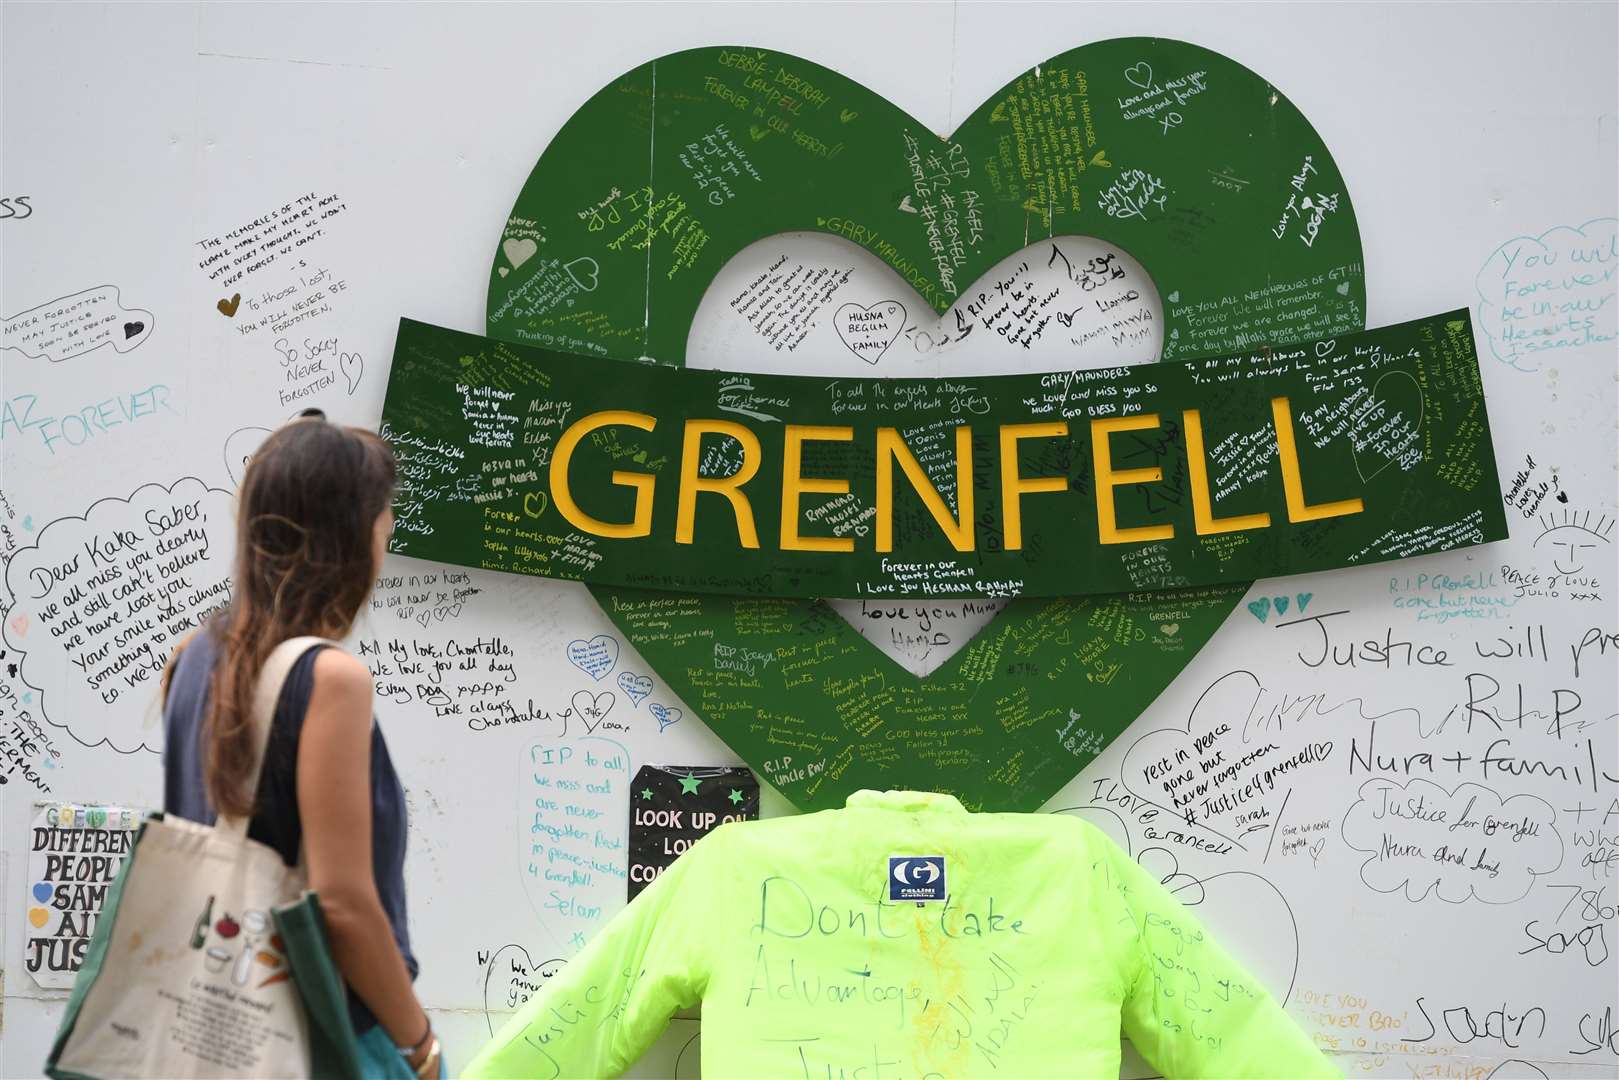 People at the Grenfell Memorial Community Mosaic at the base of the tower block in London on the third anniversary of the Grenfell Tower fire which claimed 72 lives on June 14 2017 (Kirsty O’Connor/PA)